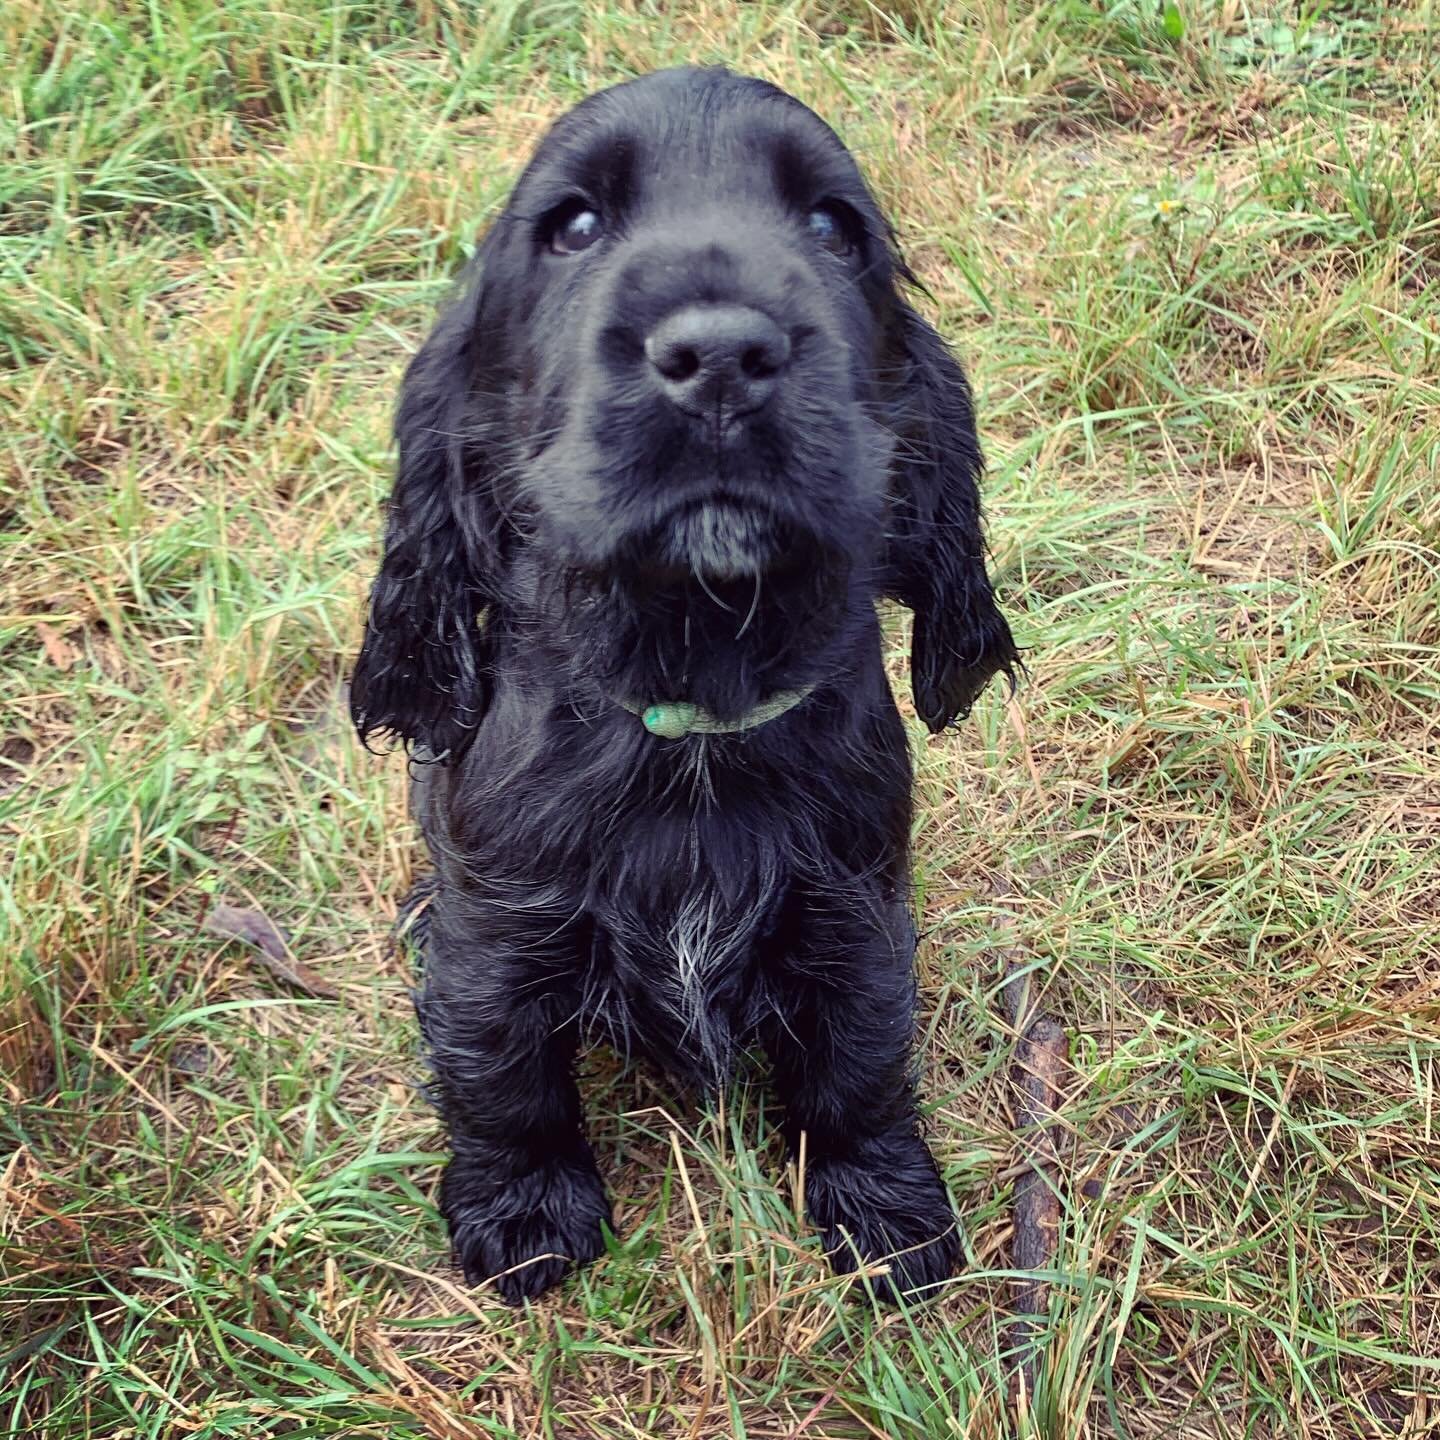 Last cocker spaniel puppy available, everyone else has been snapped up !! Beautiful little boy, utterly perfect. Vaxxed, microchipped, parents health tested, he&rsquo;s the whole package 🥰🥰 Inbox me ! 

#dogsofinstagram #doggo #dog #puppiesofinstag